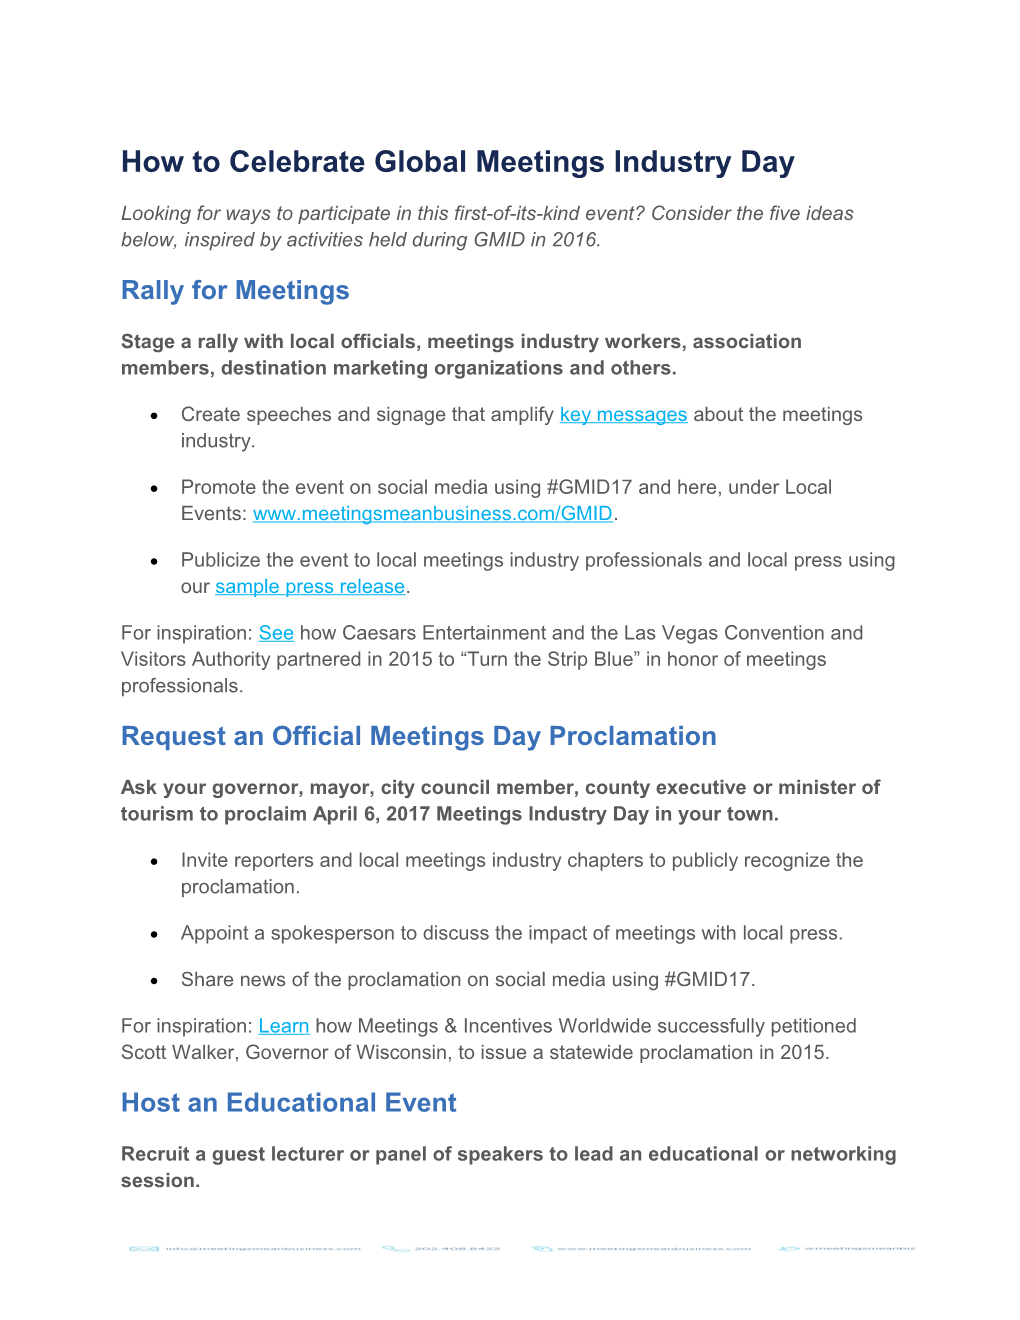 How to Celebrate Global Meetings Industry Day